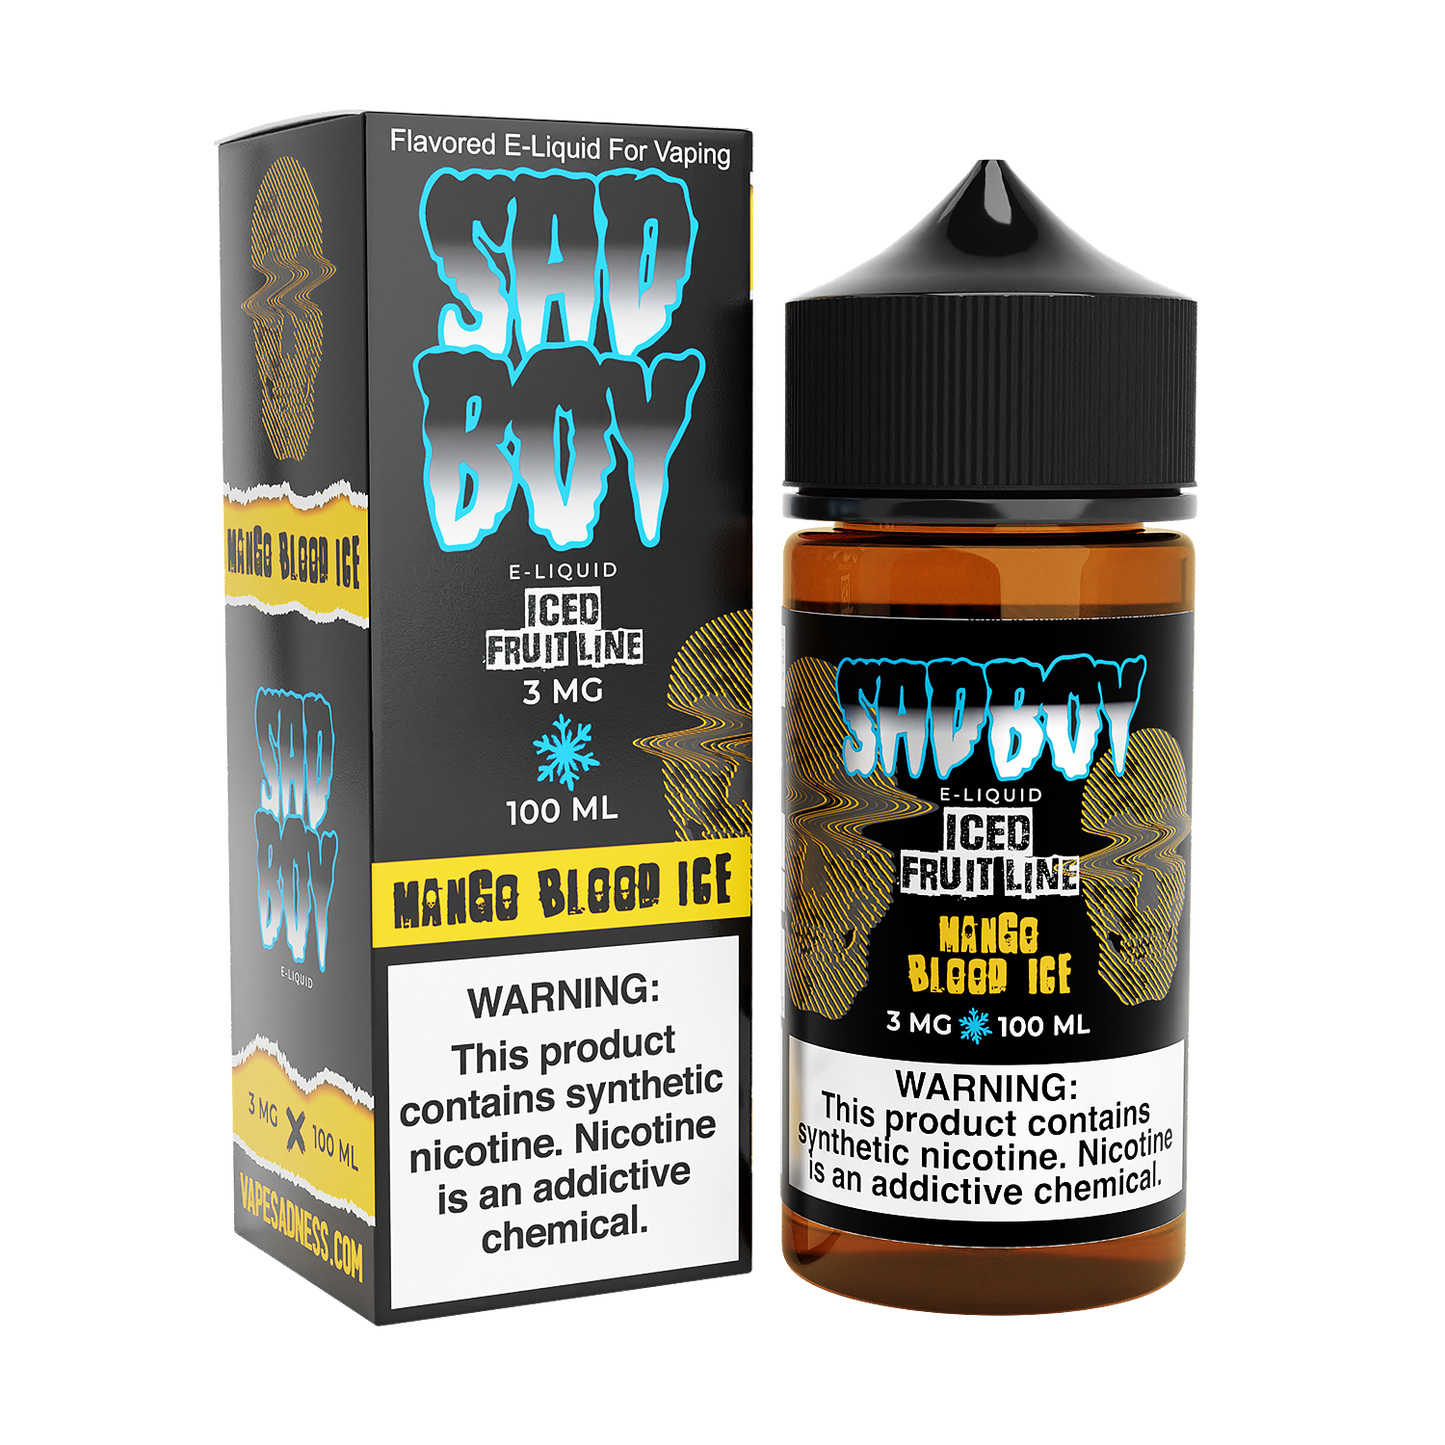 Mango Blood Ice by Sadboy Series 100mL with Packaging